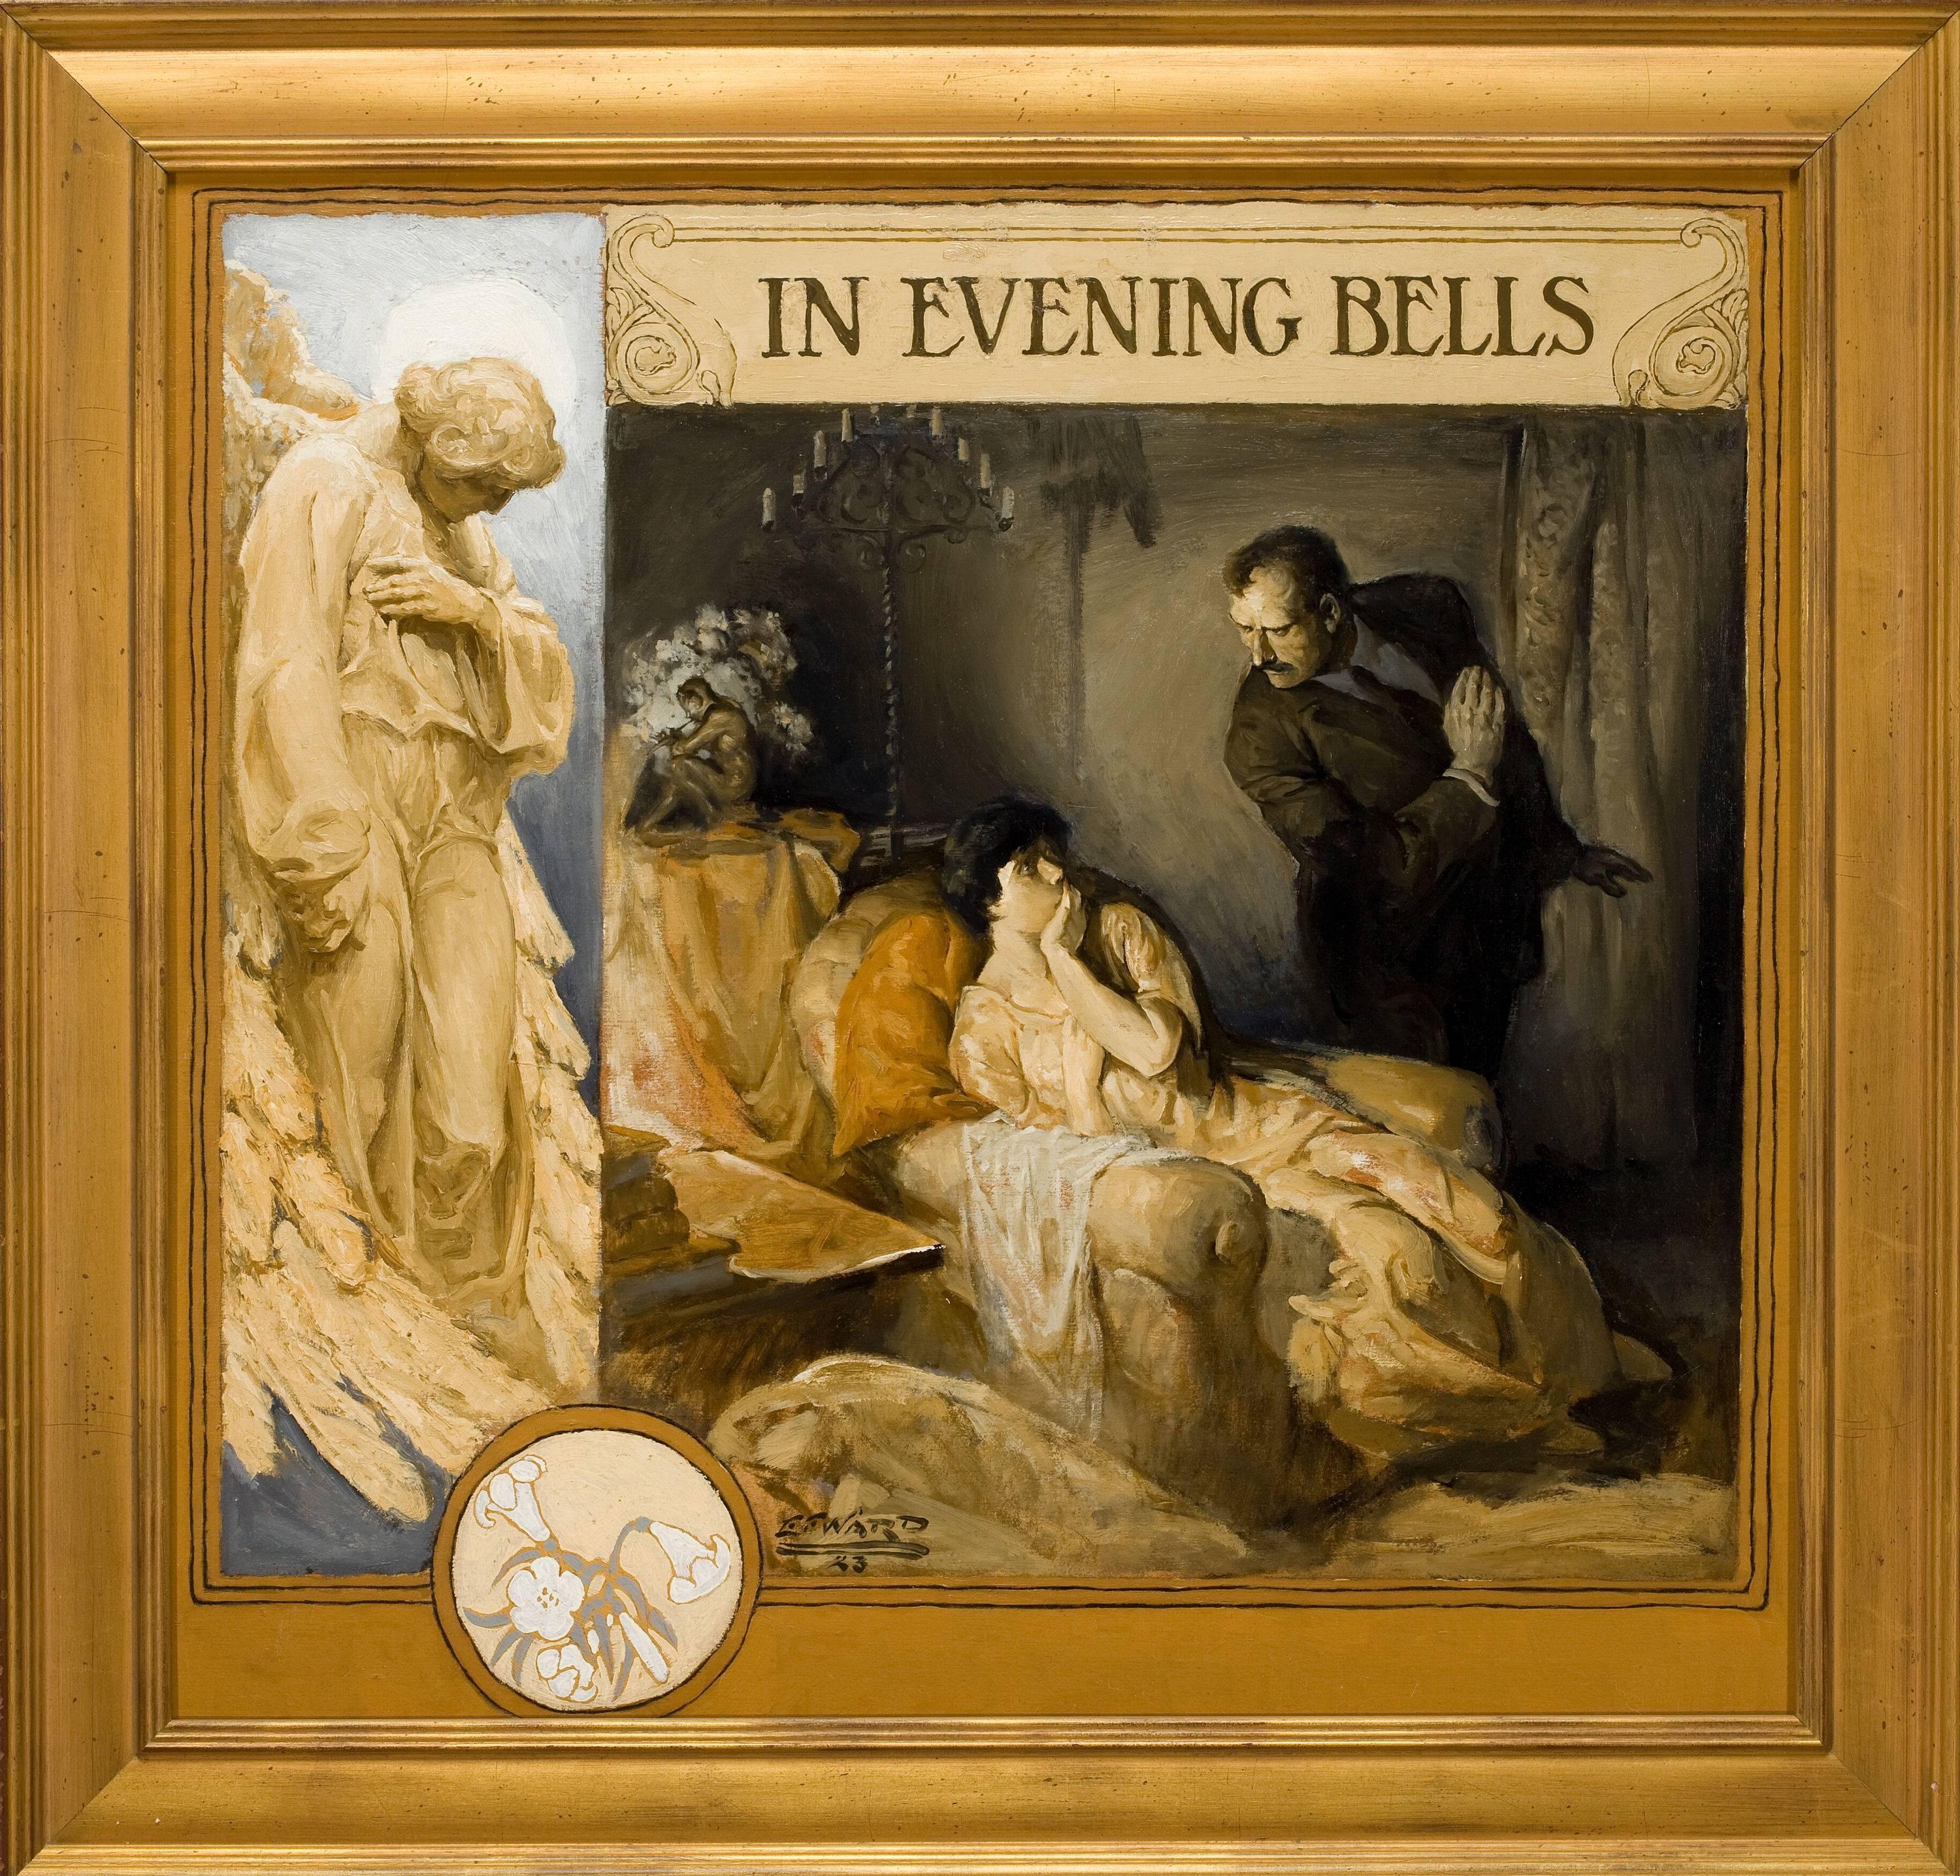 In Evening Bells, Back Book Cover - Brown Figurative Painting by Edmund Ward